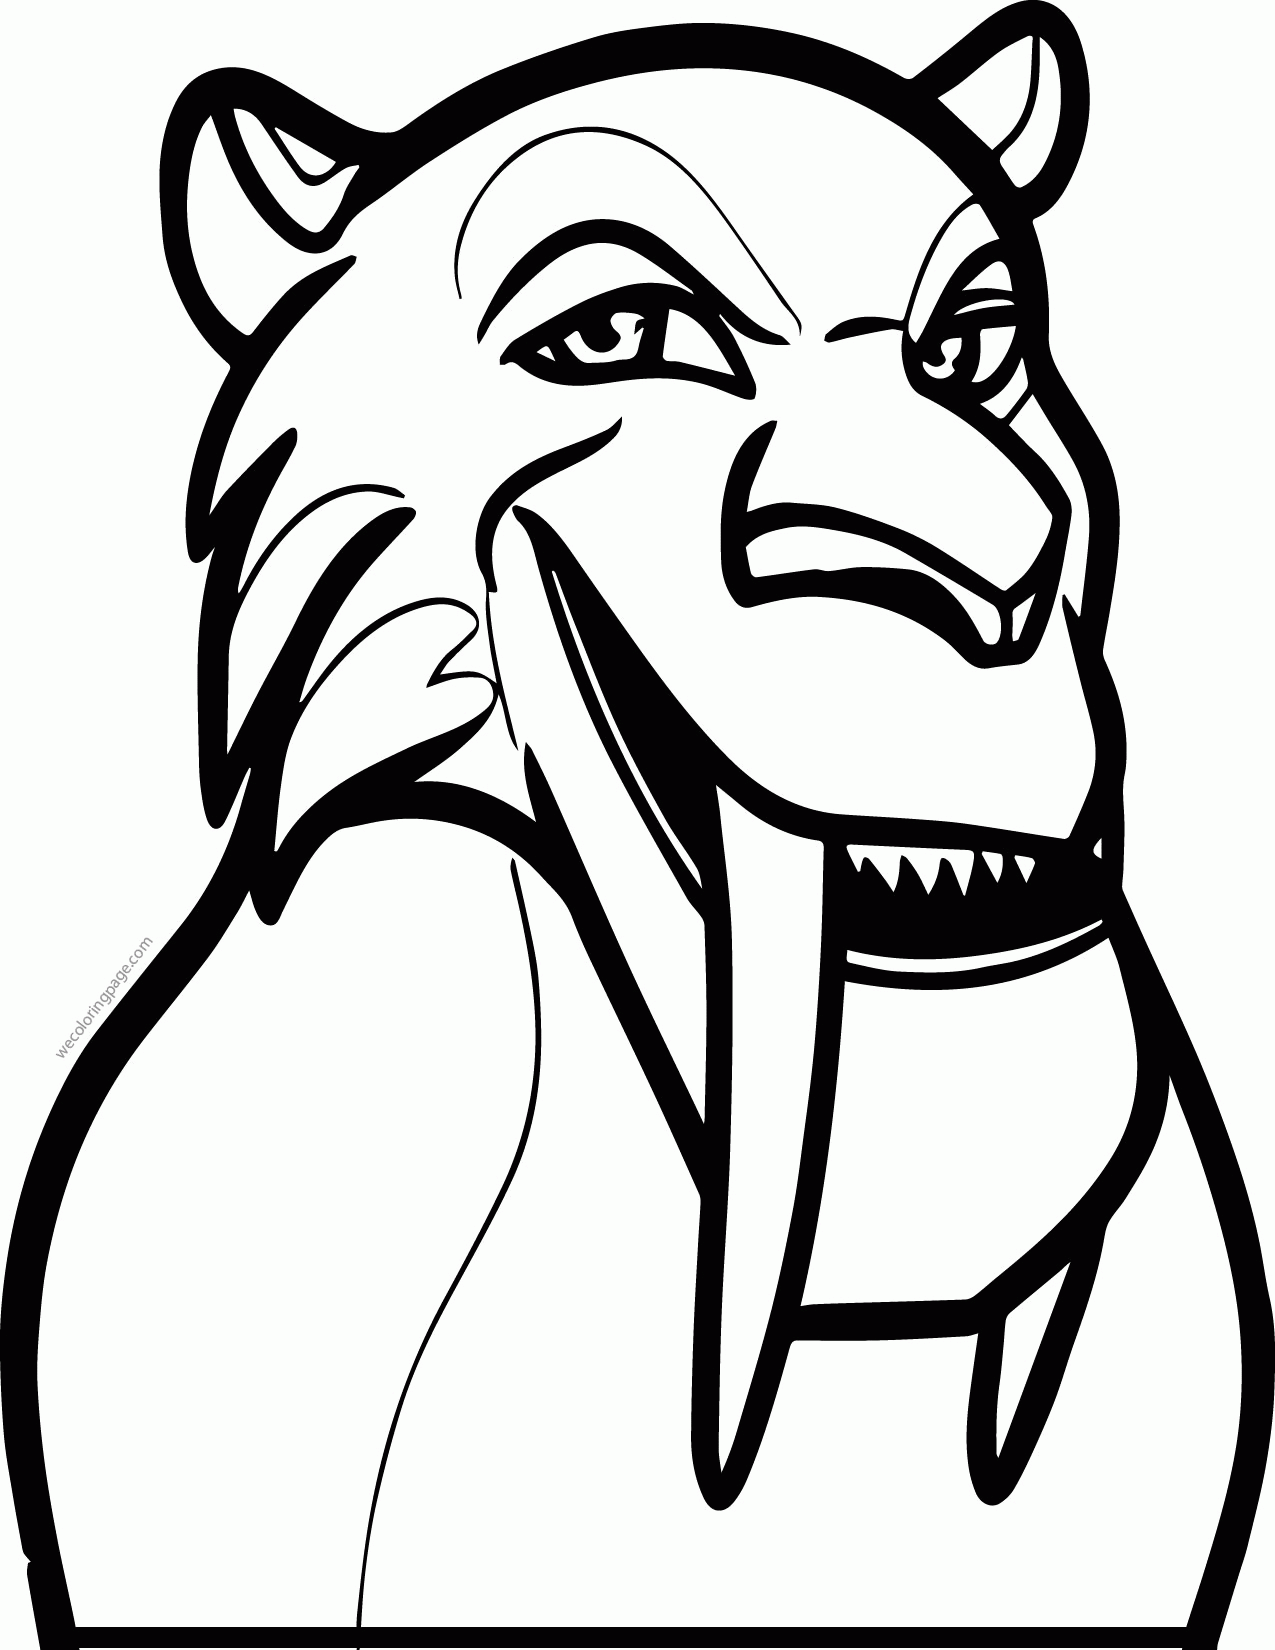 Diego From Ice Age 1 Coloring Page